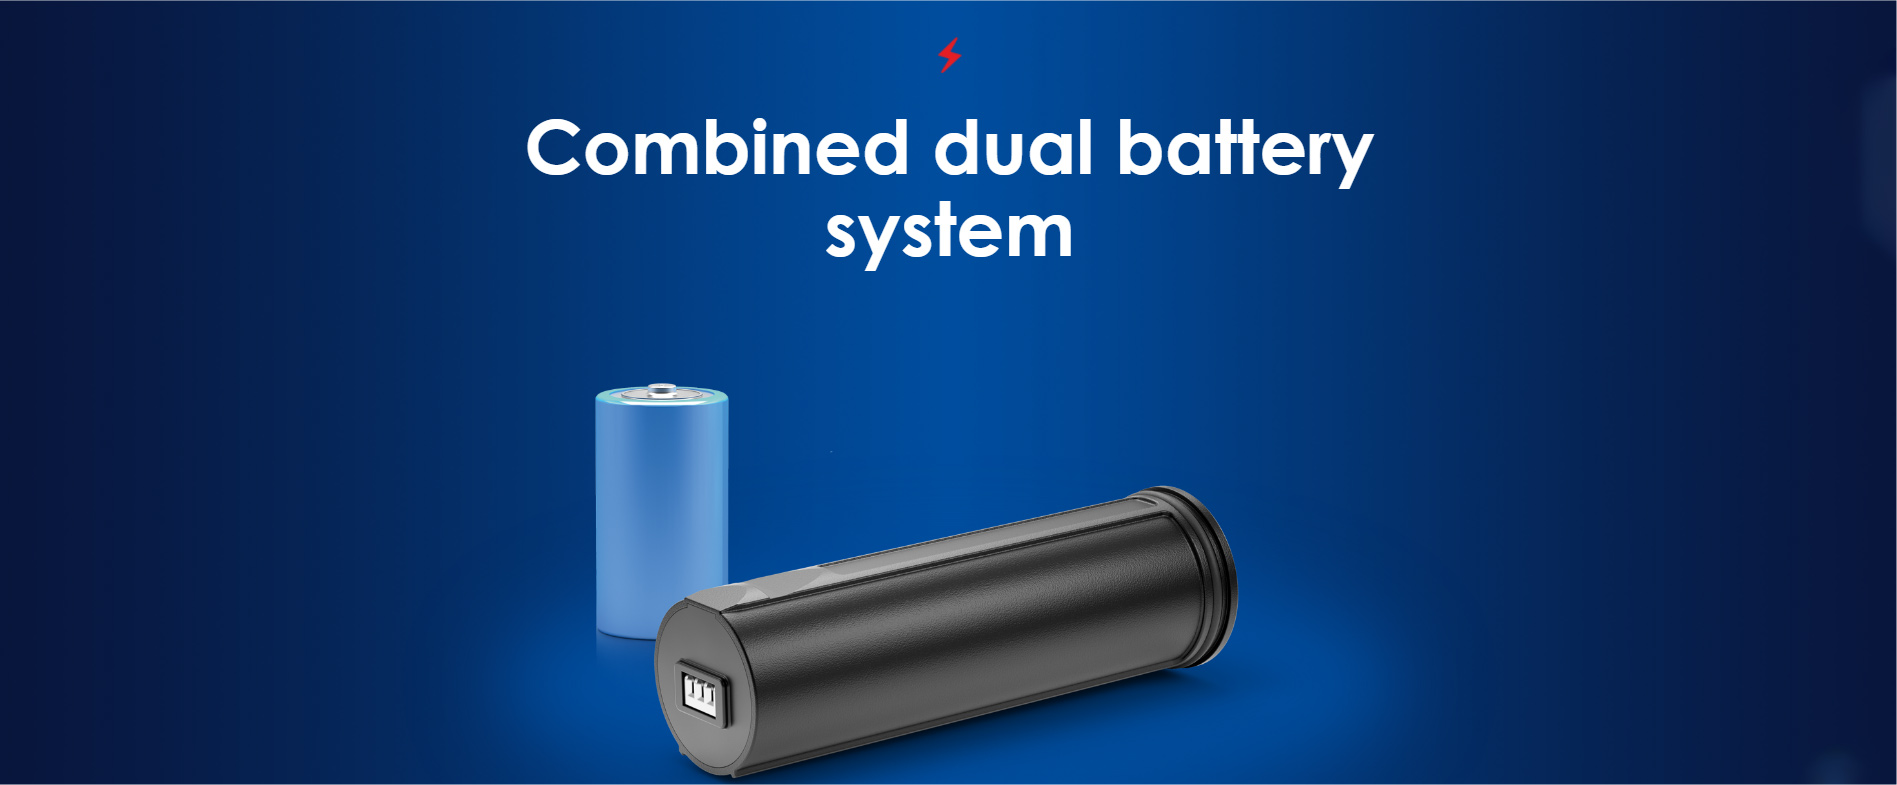 Pulsar PU-77481 Combined dual battery system